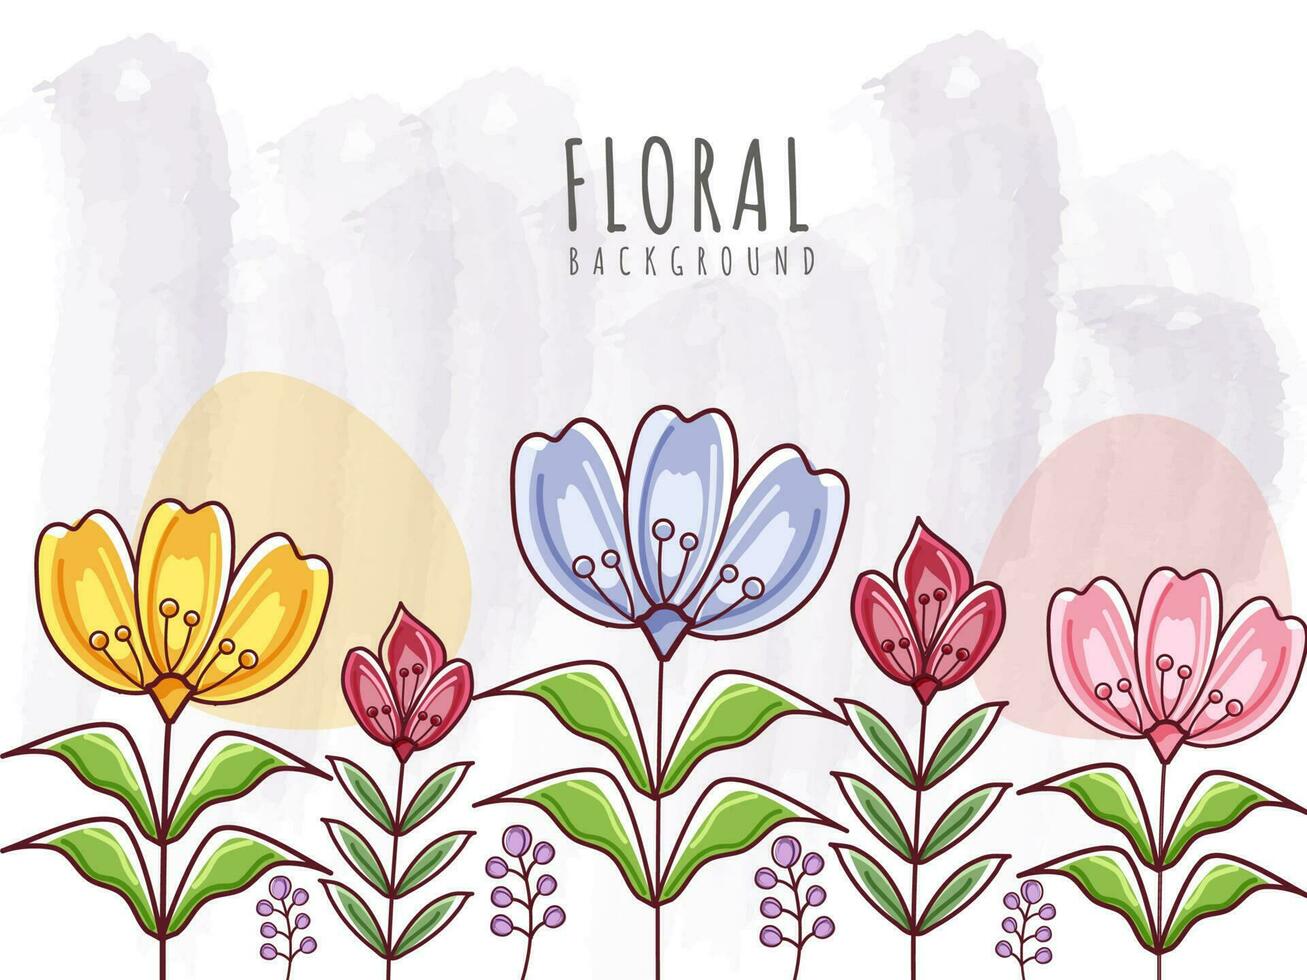 Abstract Floral Background With Colorful Flowers And Leaves. vector